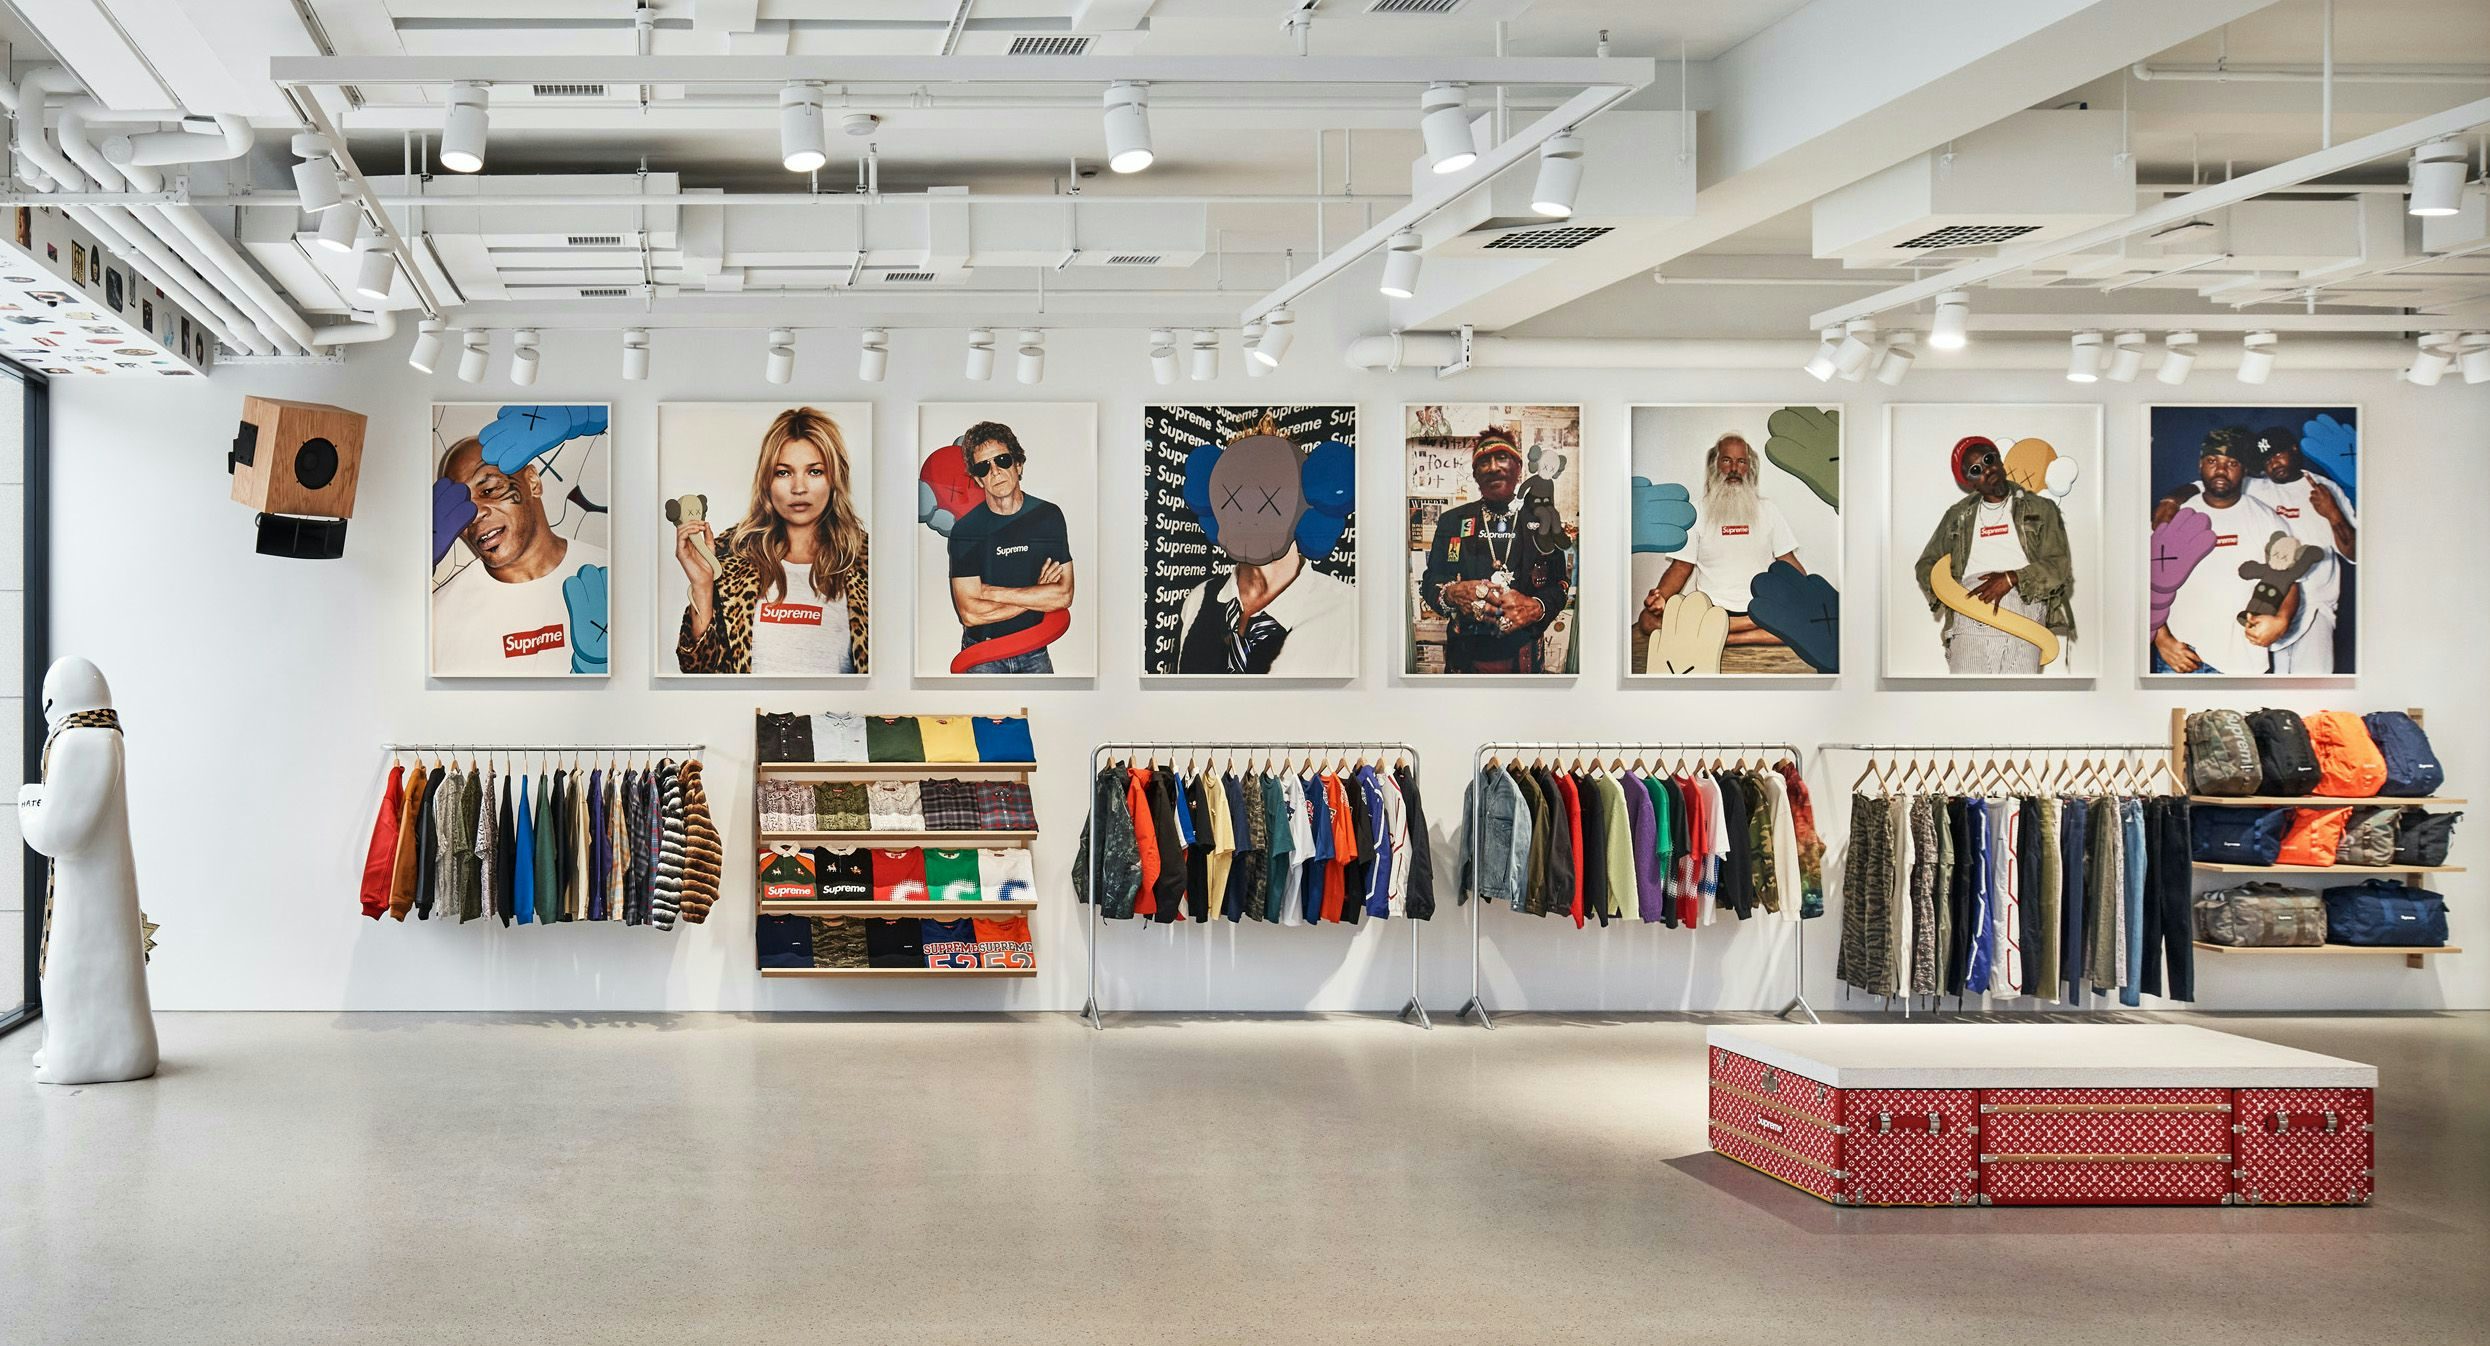 Supreme opens in Shanghai, but is it still relevant?